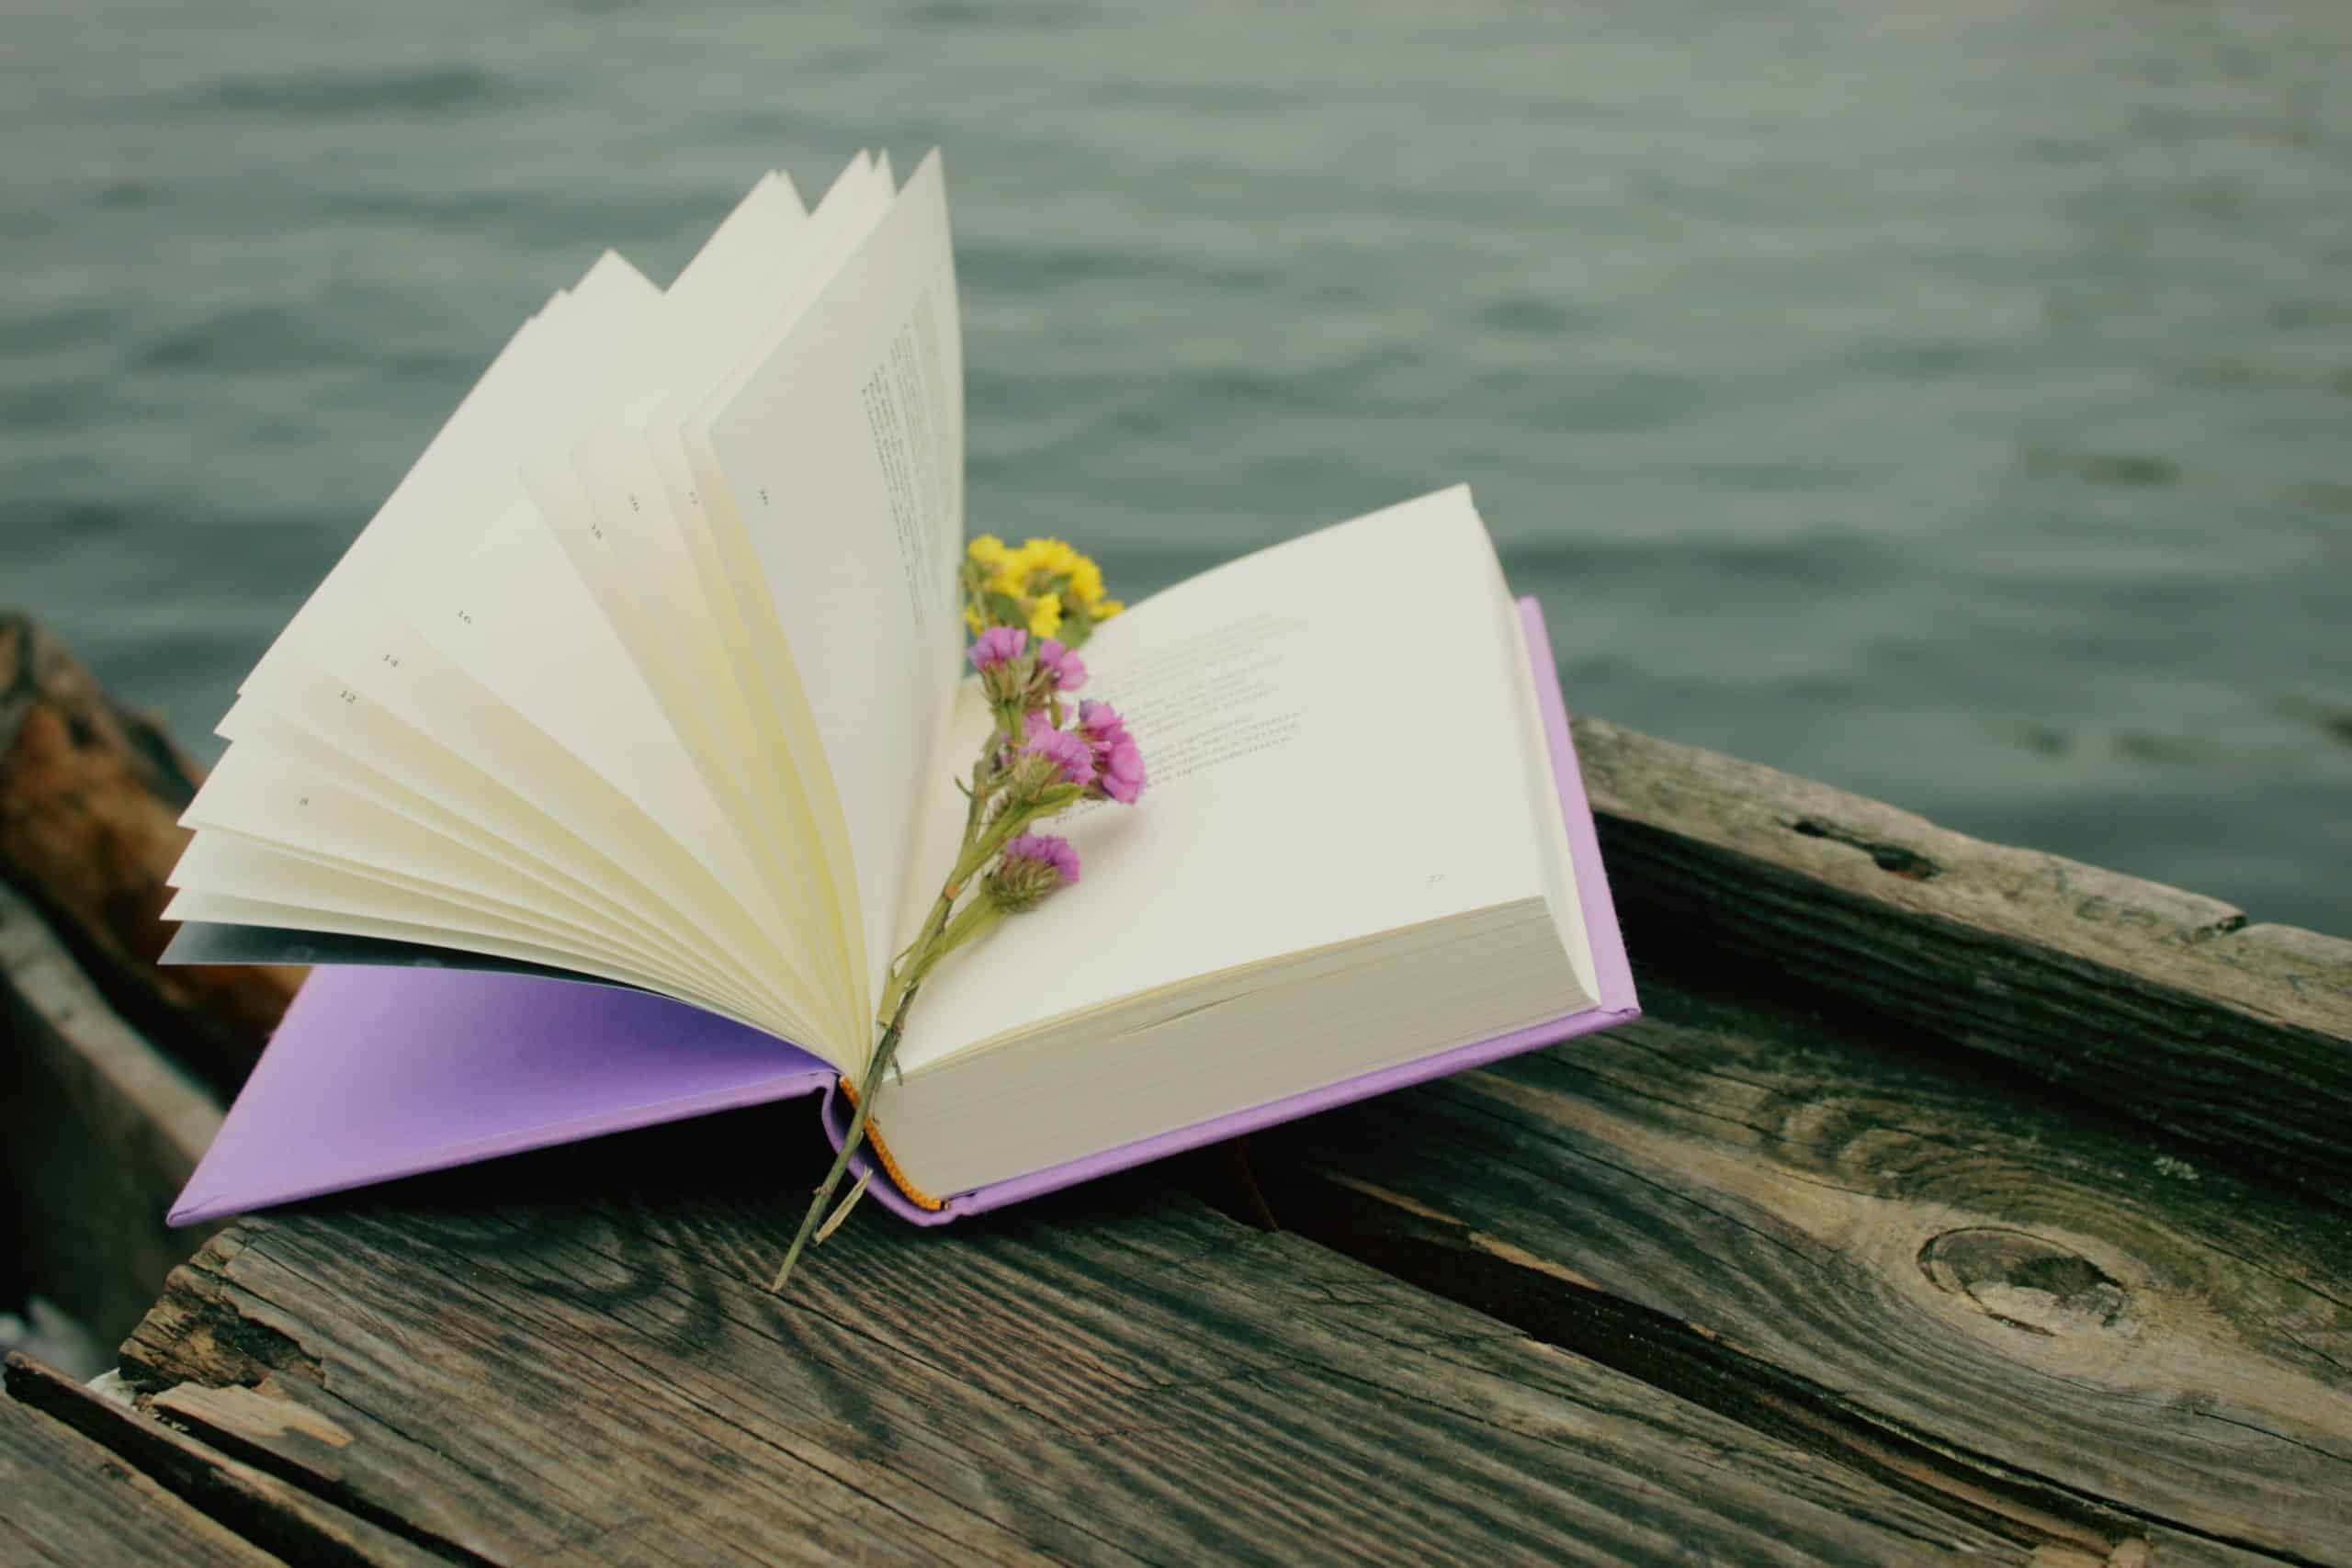 Open book with a yellow flower against blue lake